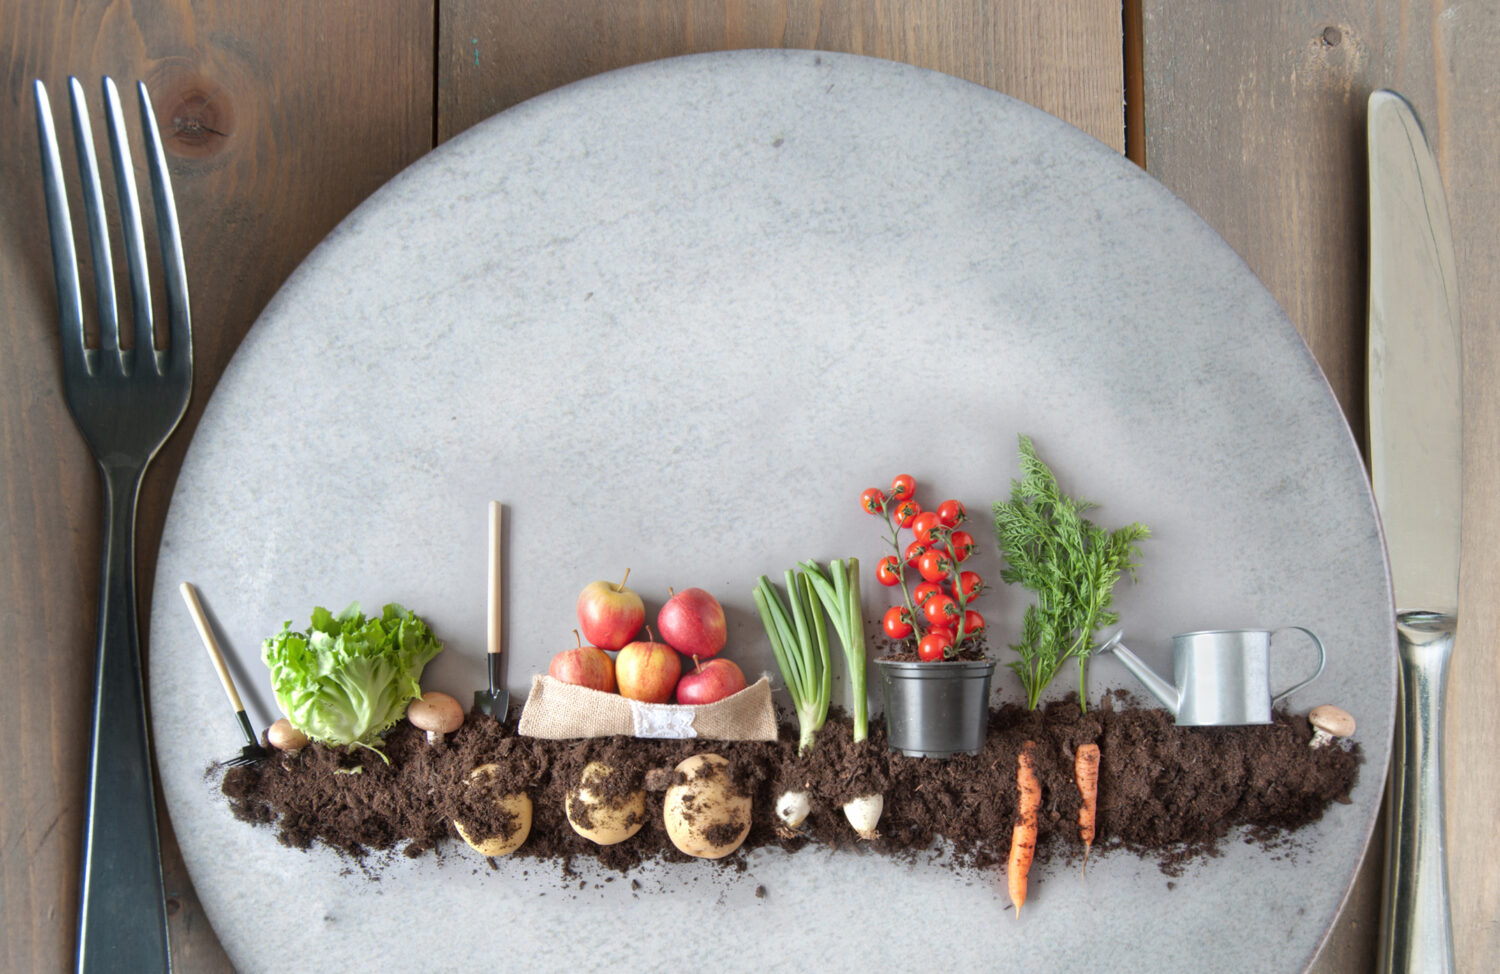 Organic fruits and vegetables garden on a kitchen plate